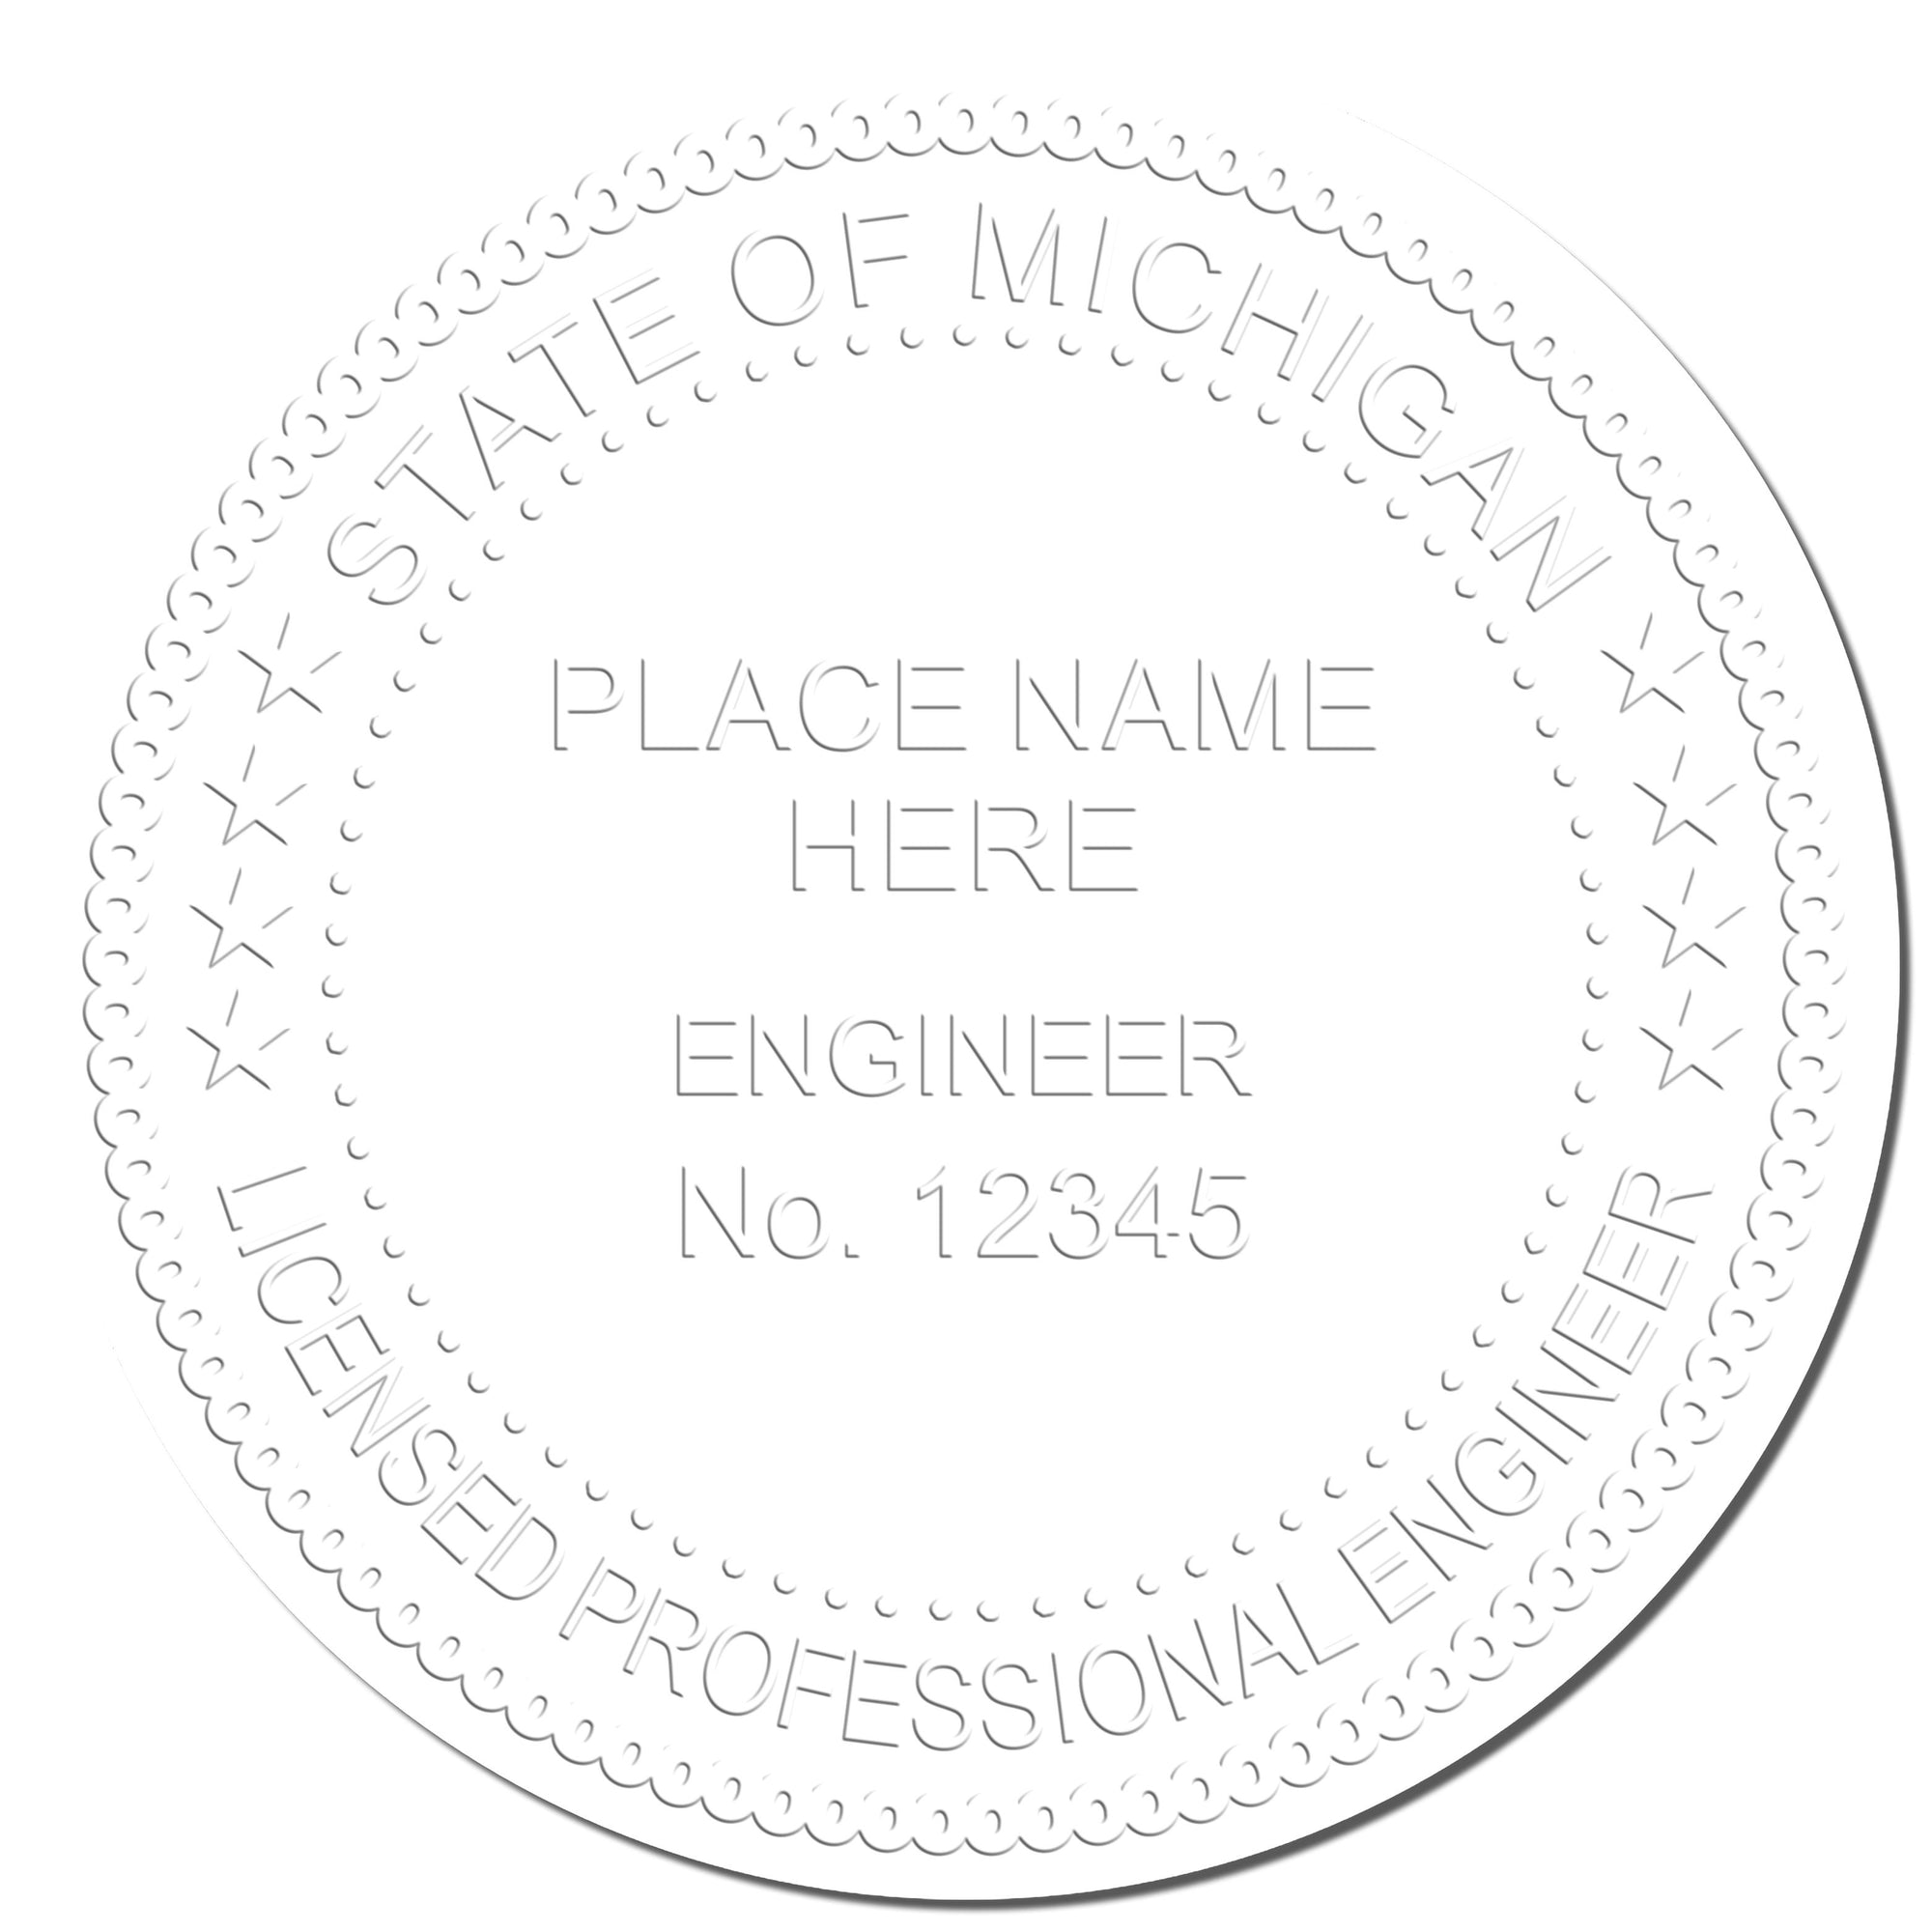 The main image for the Michigan Engineer Desk Seal depicting a sample of the imprint and electronic files